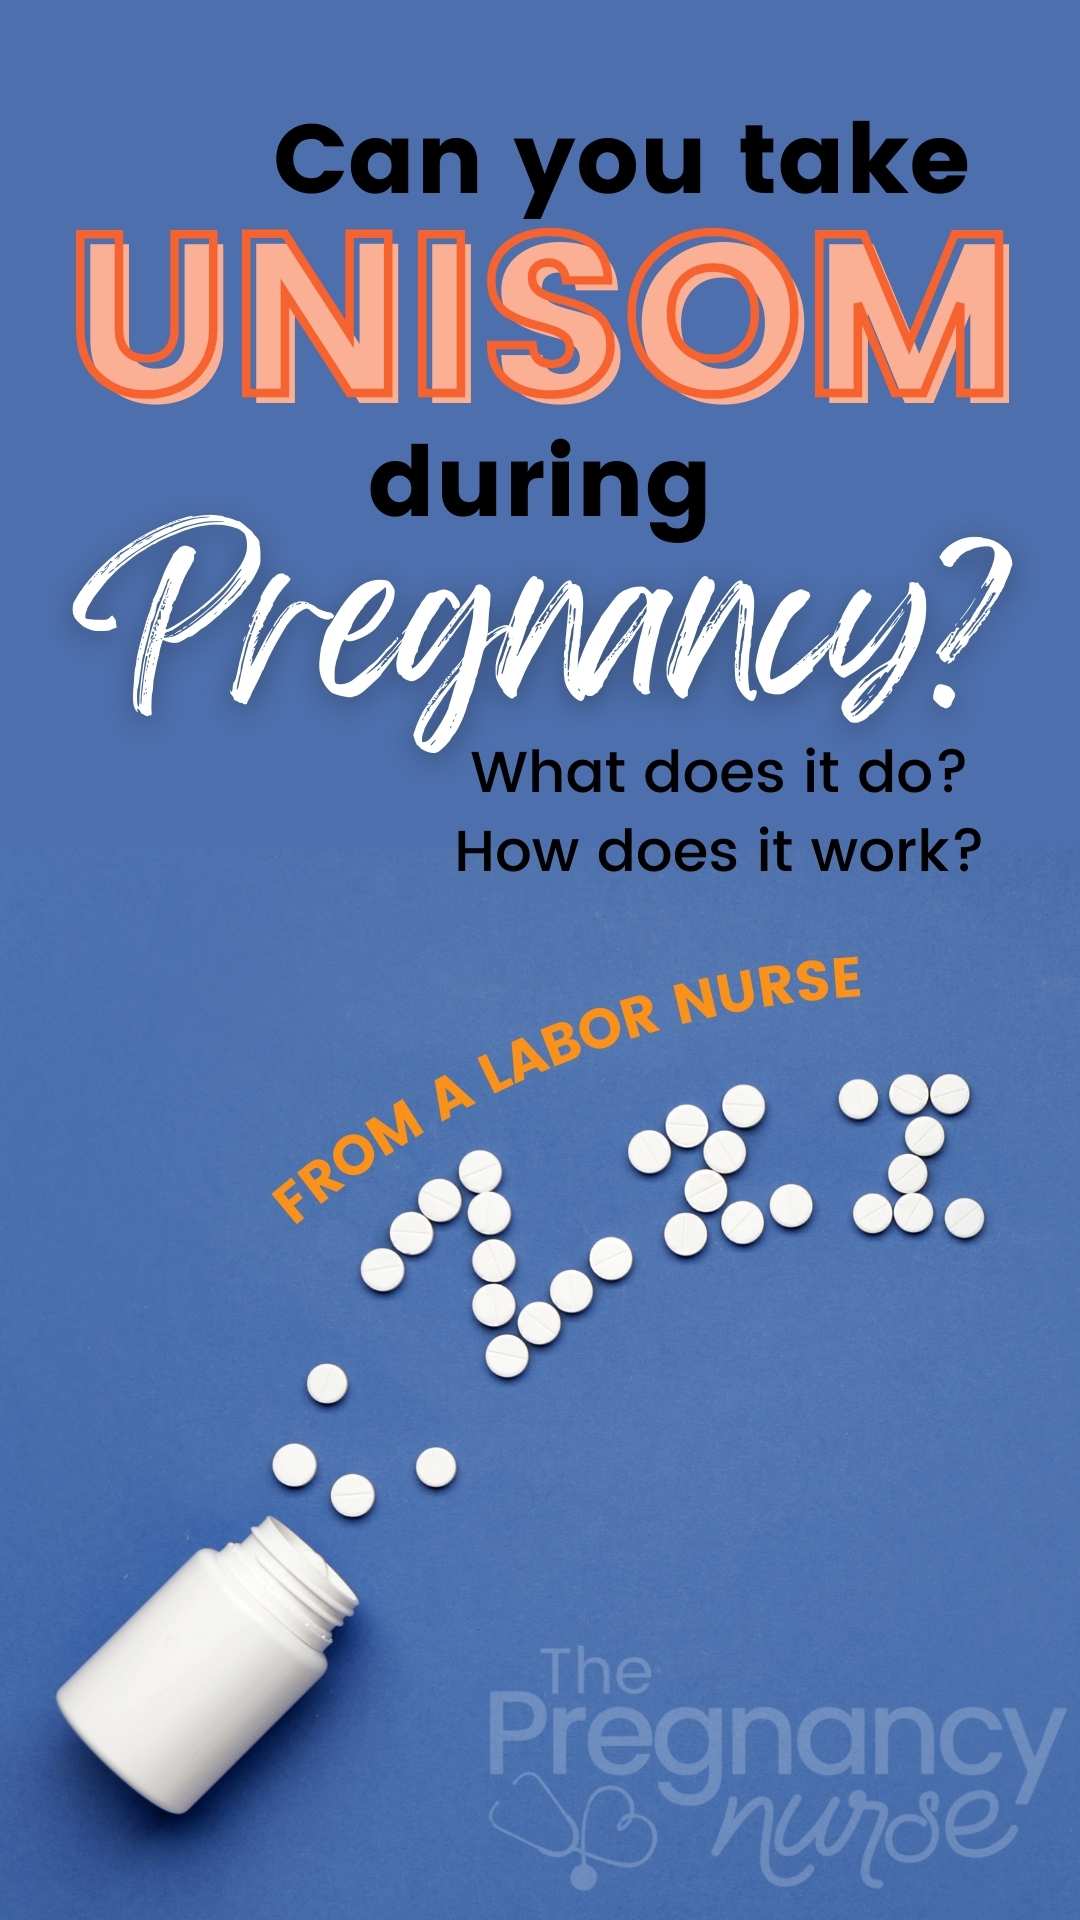 Do you find it difficult to get a good night's sleep while pregnant? You're not alone. Many pregnant people have difficulty sleeping due to nausea, heartburn, and other discomforts. Unisom is a medication that can help you get the sleep you need during pregnancy. In this blog post, we'll discuss what Unisom is, how it works, and whether or not it's safe to take during pregnancy. We'll also provide some tips for getting a better night's sleep while pregnant. Thanks for reading!